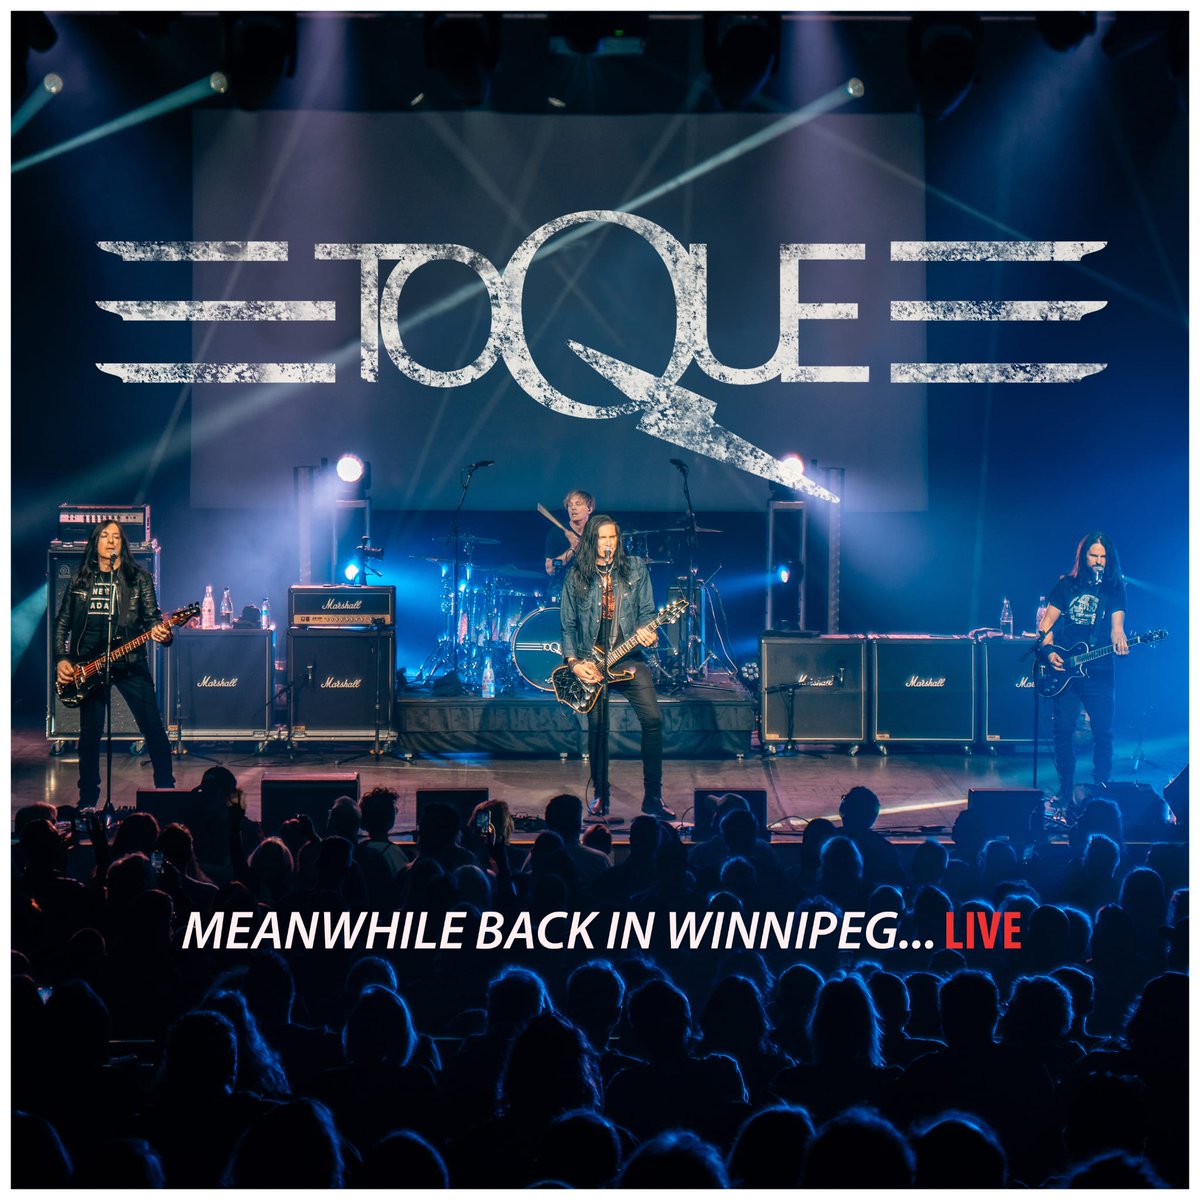 Looking for some Fresh Music? Enjoy our New 3 Song LIVE EP, now on @Spotify 'Meanwhile Back in Winnipeg - Live'. Features 2 @Streetheartband Songs, w/ Jeff Neill from joining us onstage for these great versions. Plus our song 'You Can't Stop It' open.spotify.com/album/6TfZWGvR…